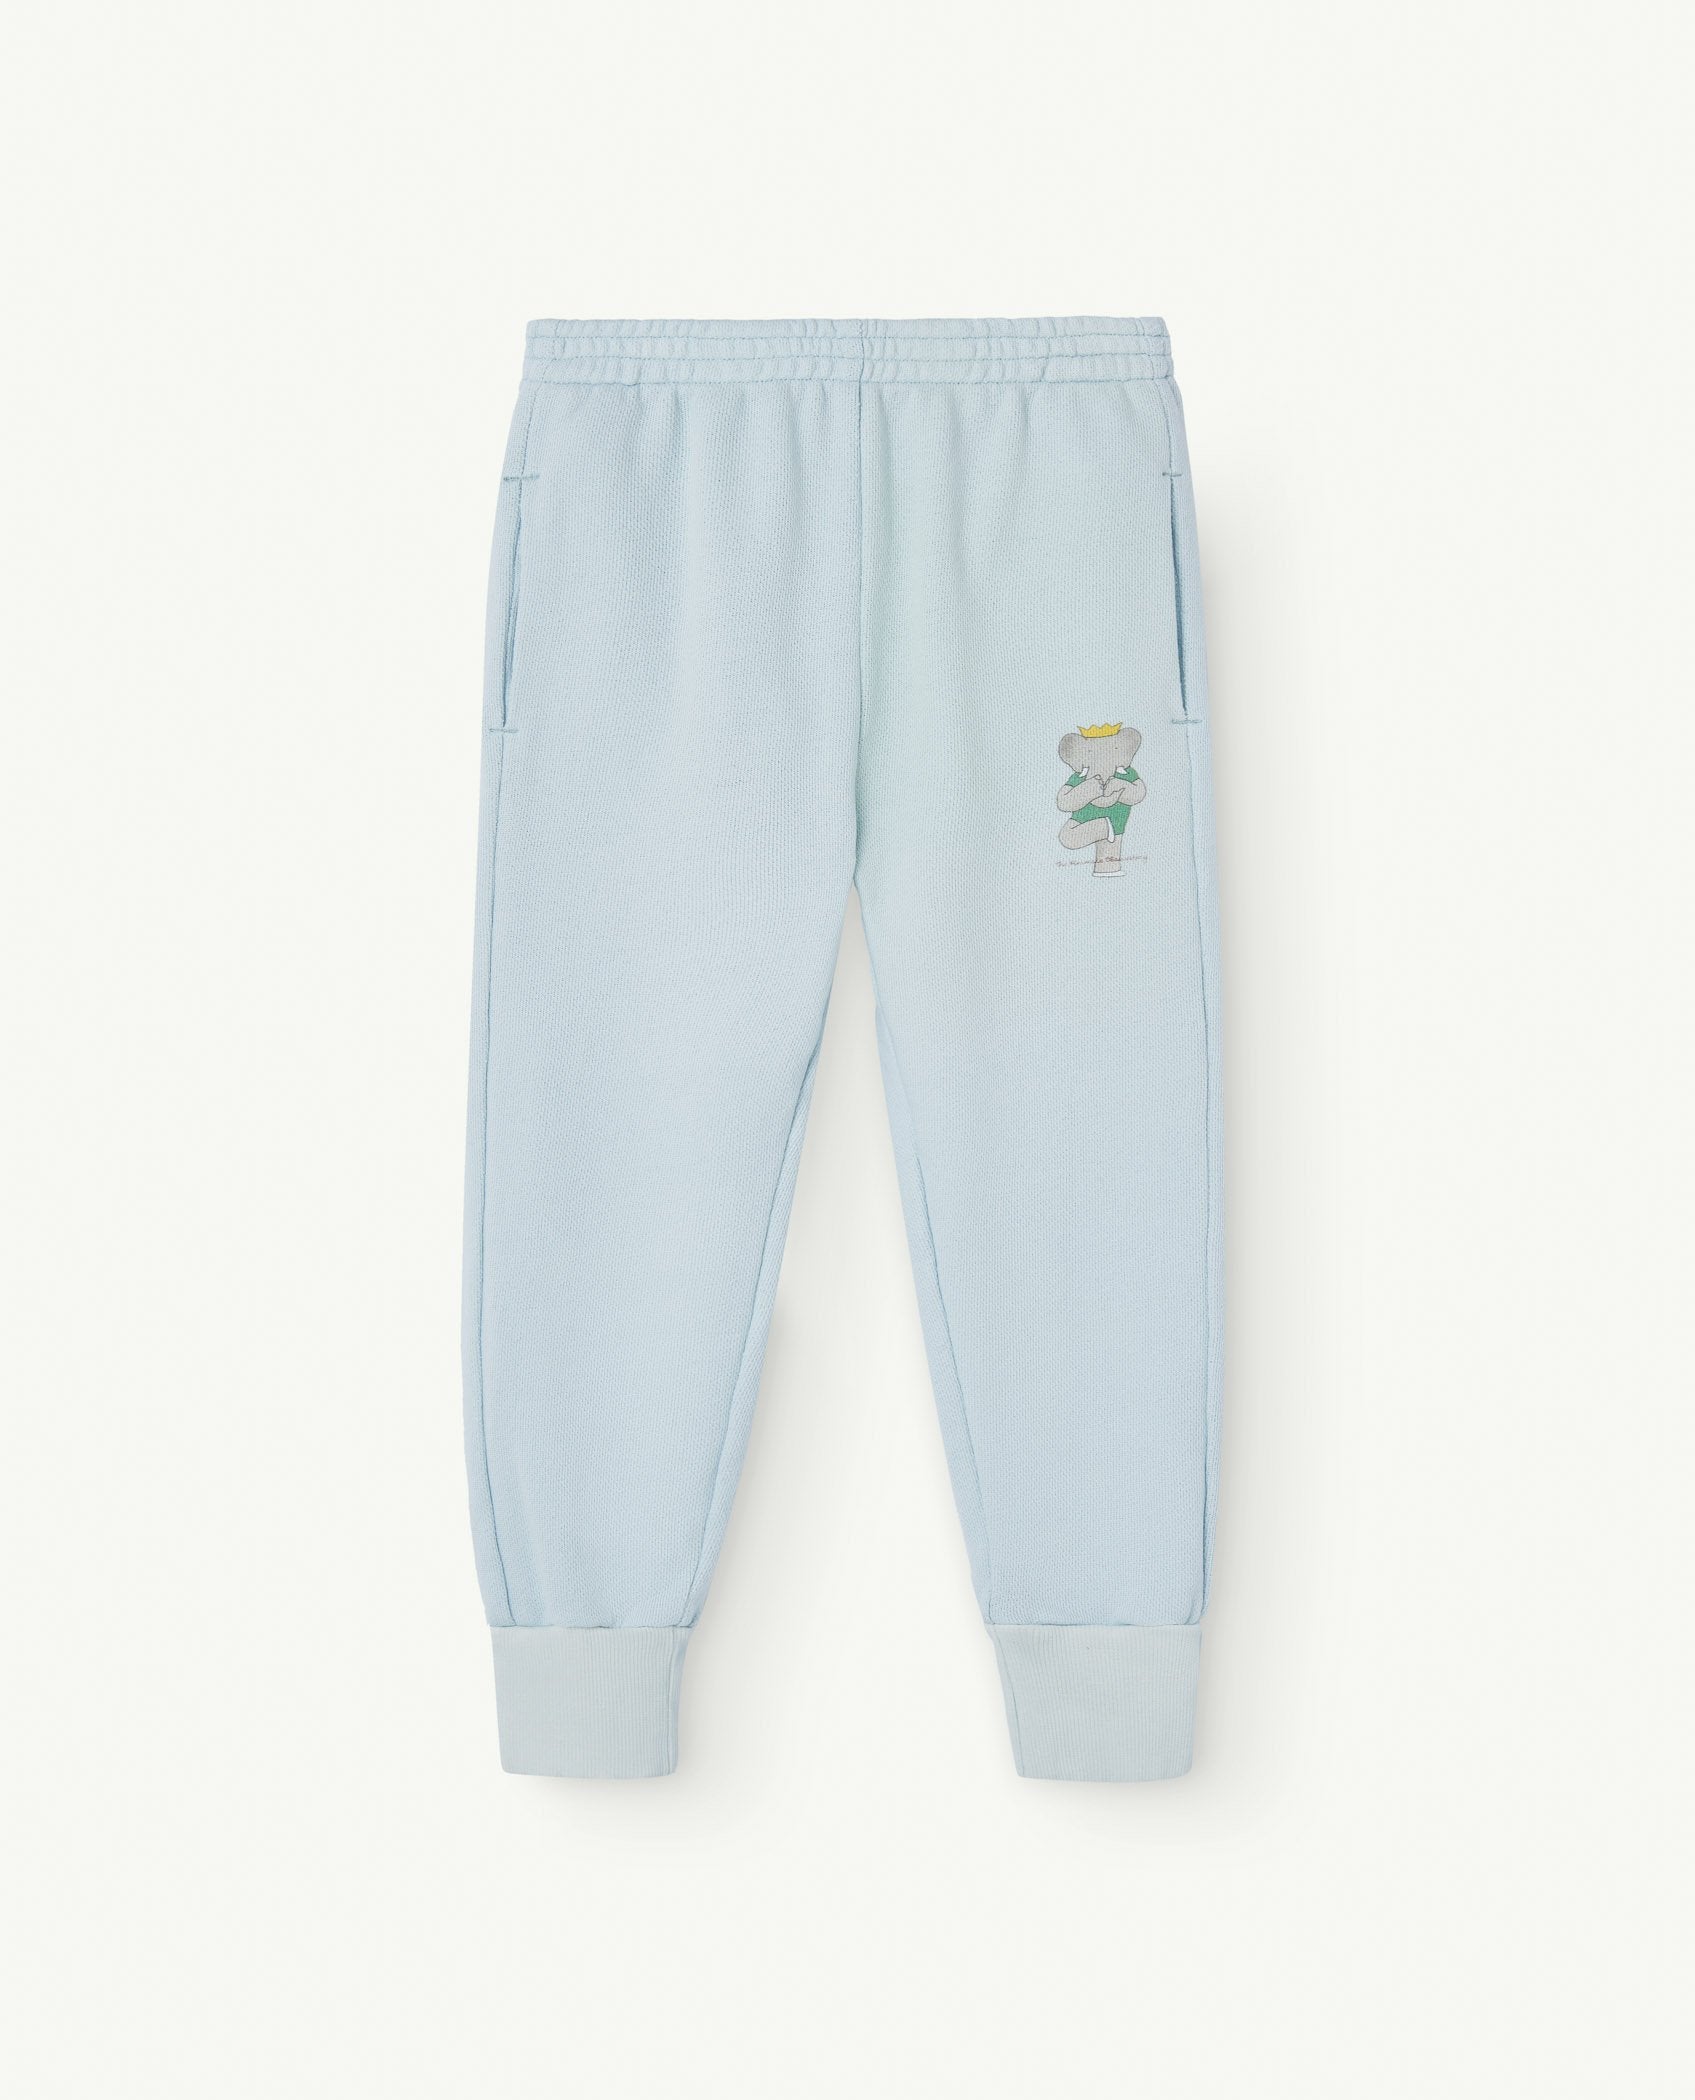 Babar Soft Blue Panther Sweatpants PRODUCT FRONT